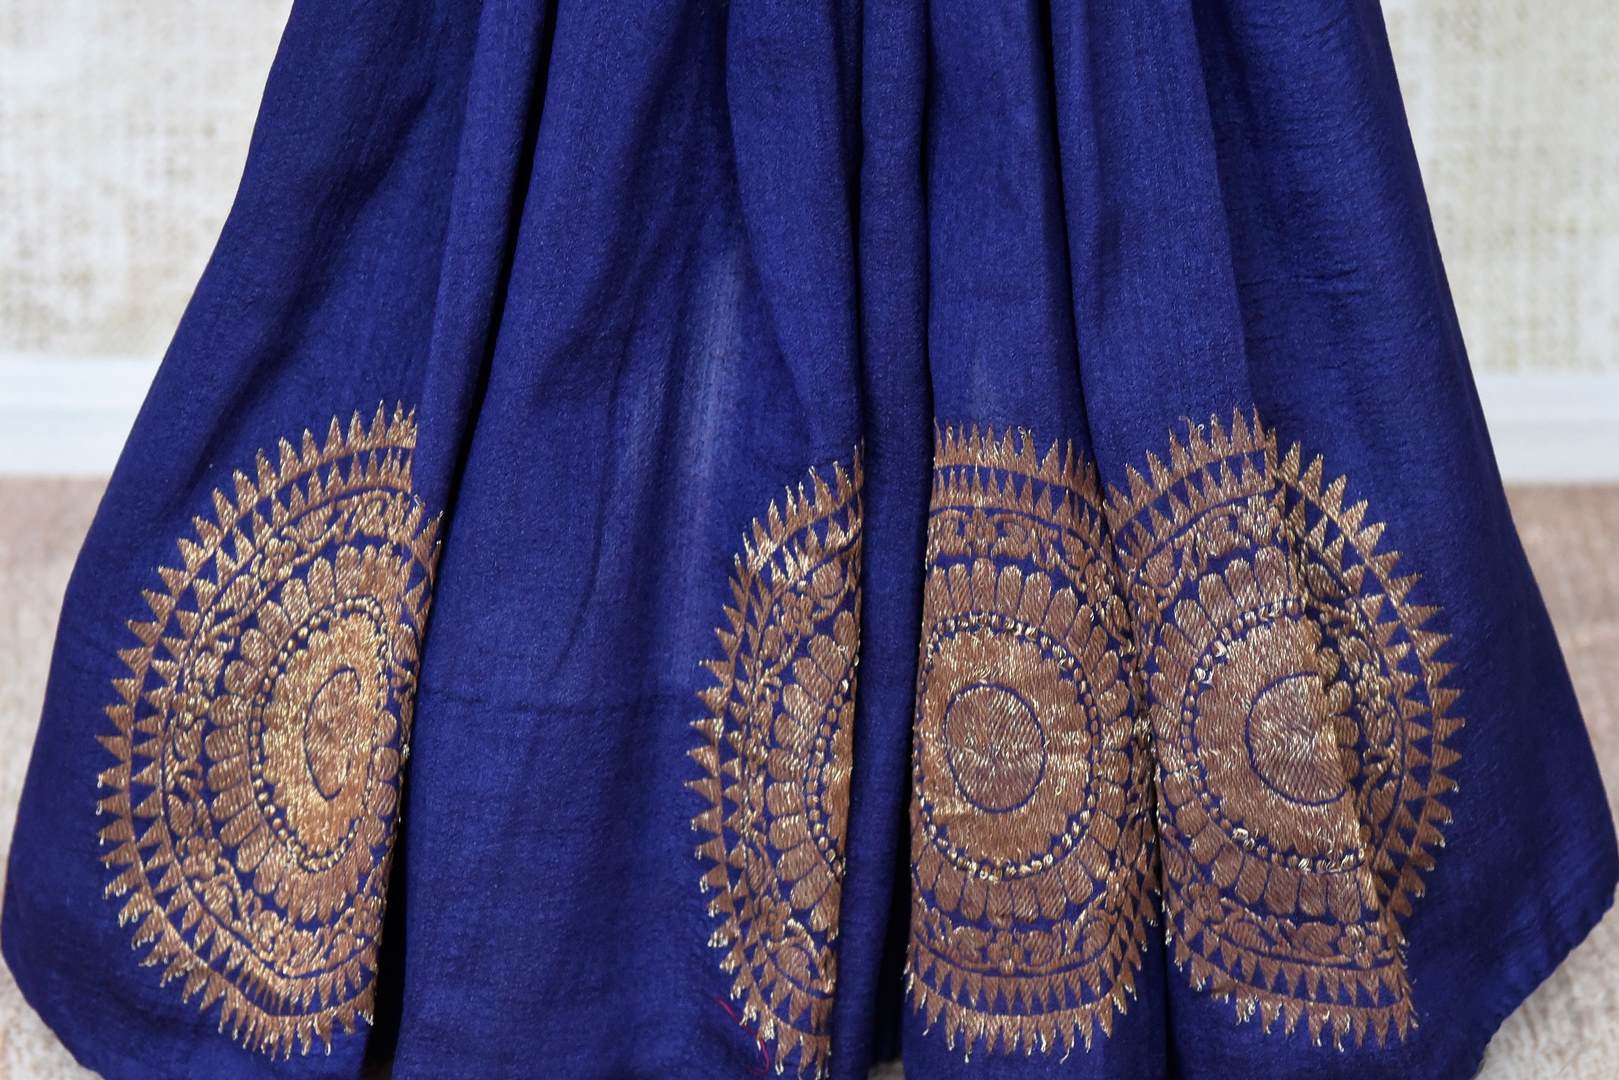 Shop navy blue muga silk saree online in USA with big chakra zari buta. Elevate your traditional style with exquisite Indian handloom sarees from Pure Elegance Indian clothing store in USA. Explore a range of stunning pure silk saris, embroidered sarees, wedding sarees especially from India for women in USA.-pleats